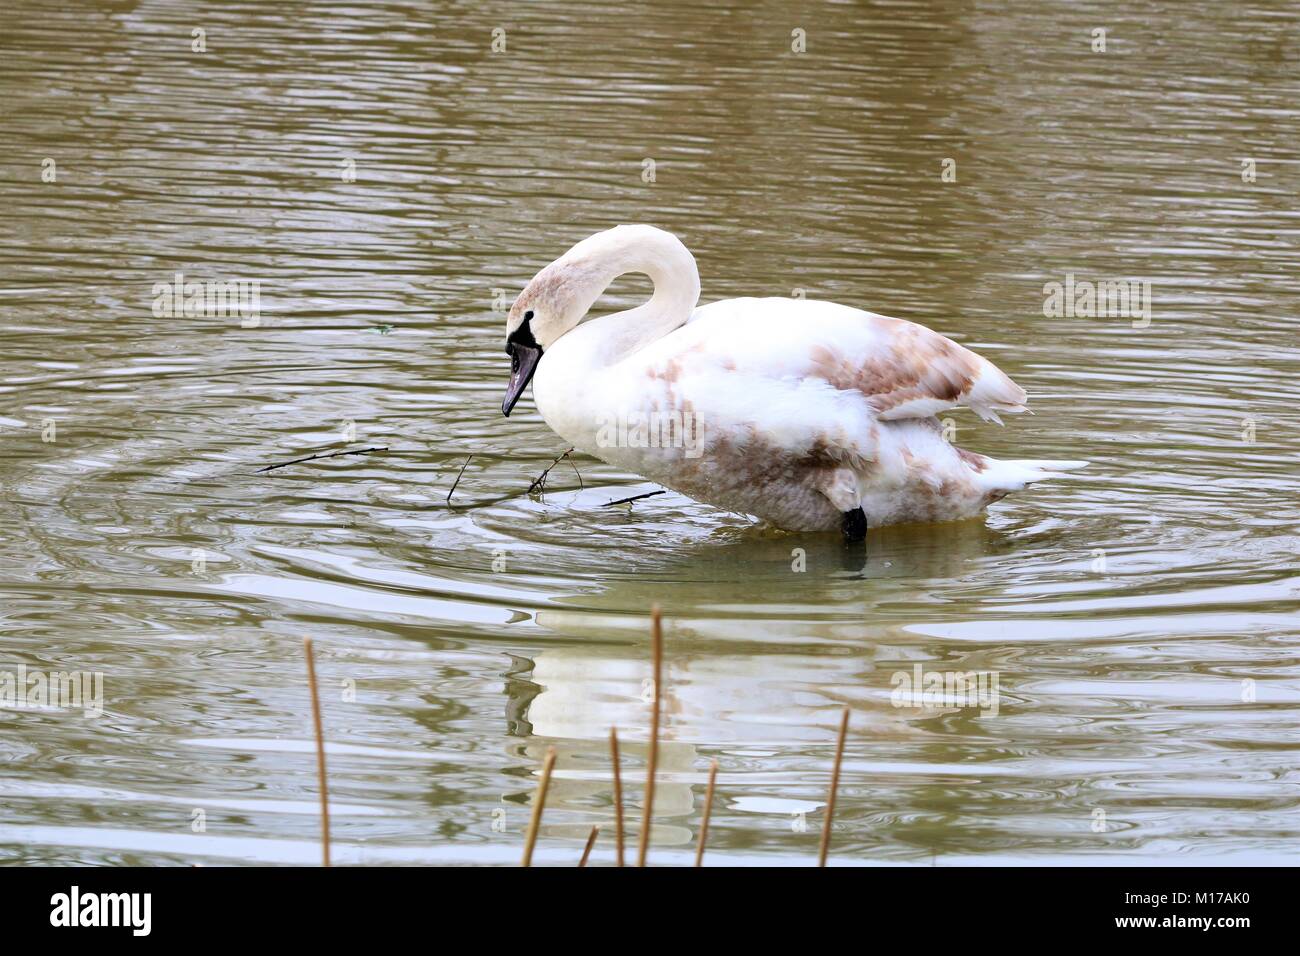 White swan with curved neck looking for food in the water making ripples Stock Photo